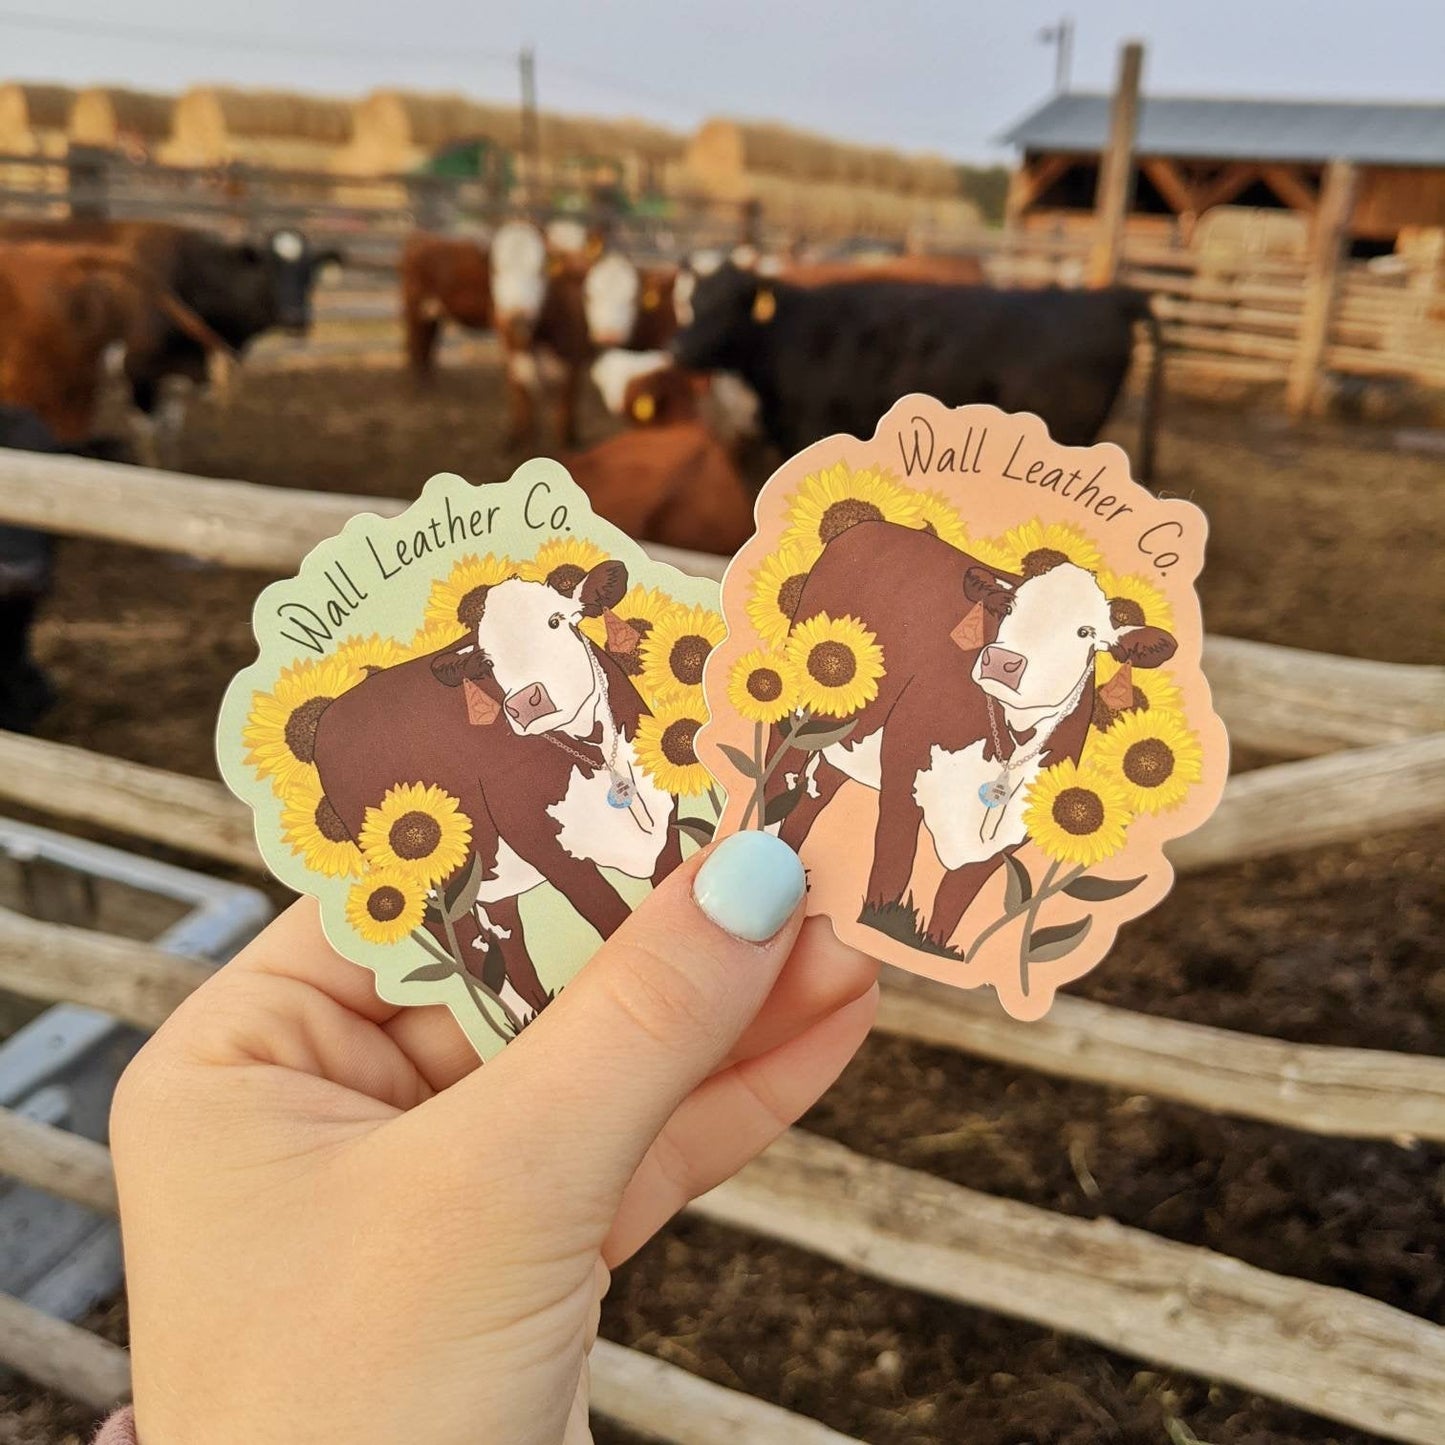 Hereford & Sunflowers Sticker Decal